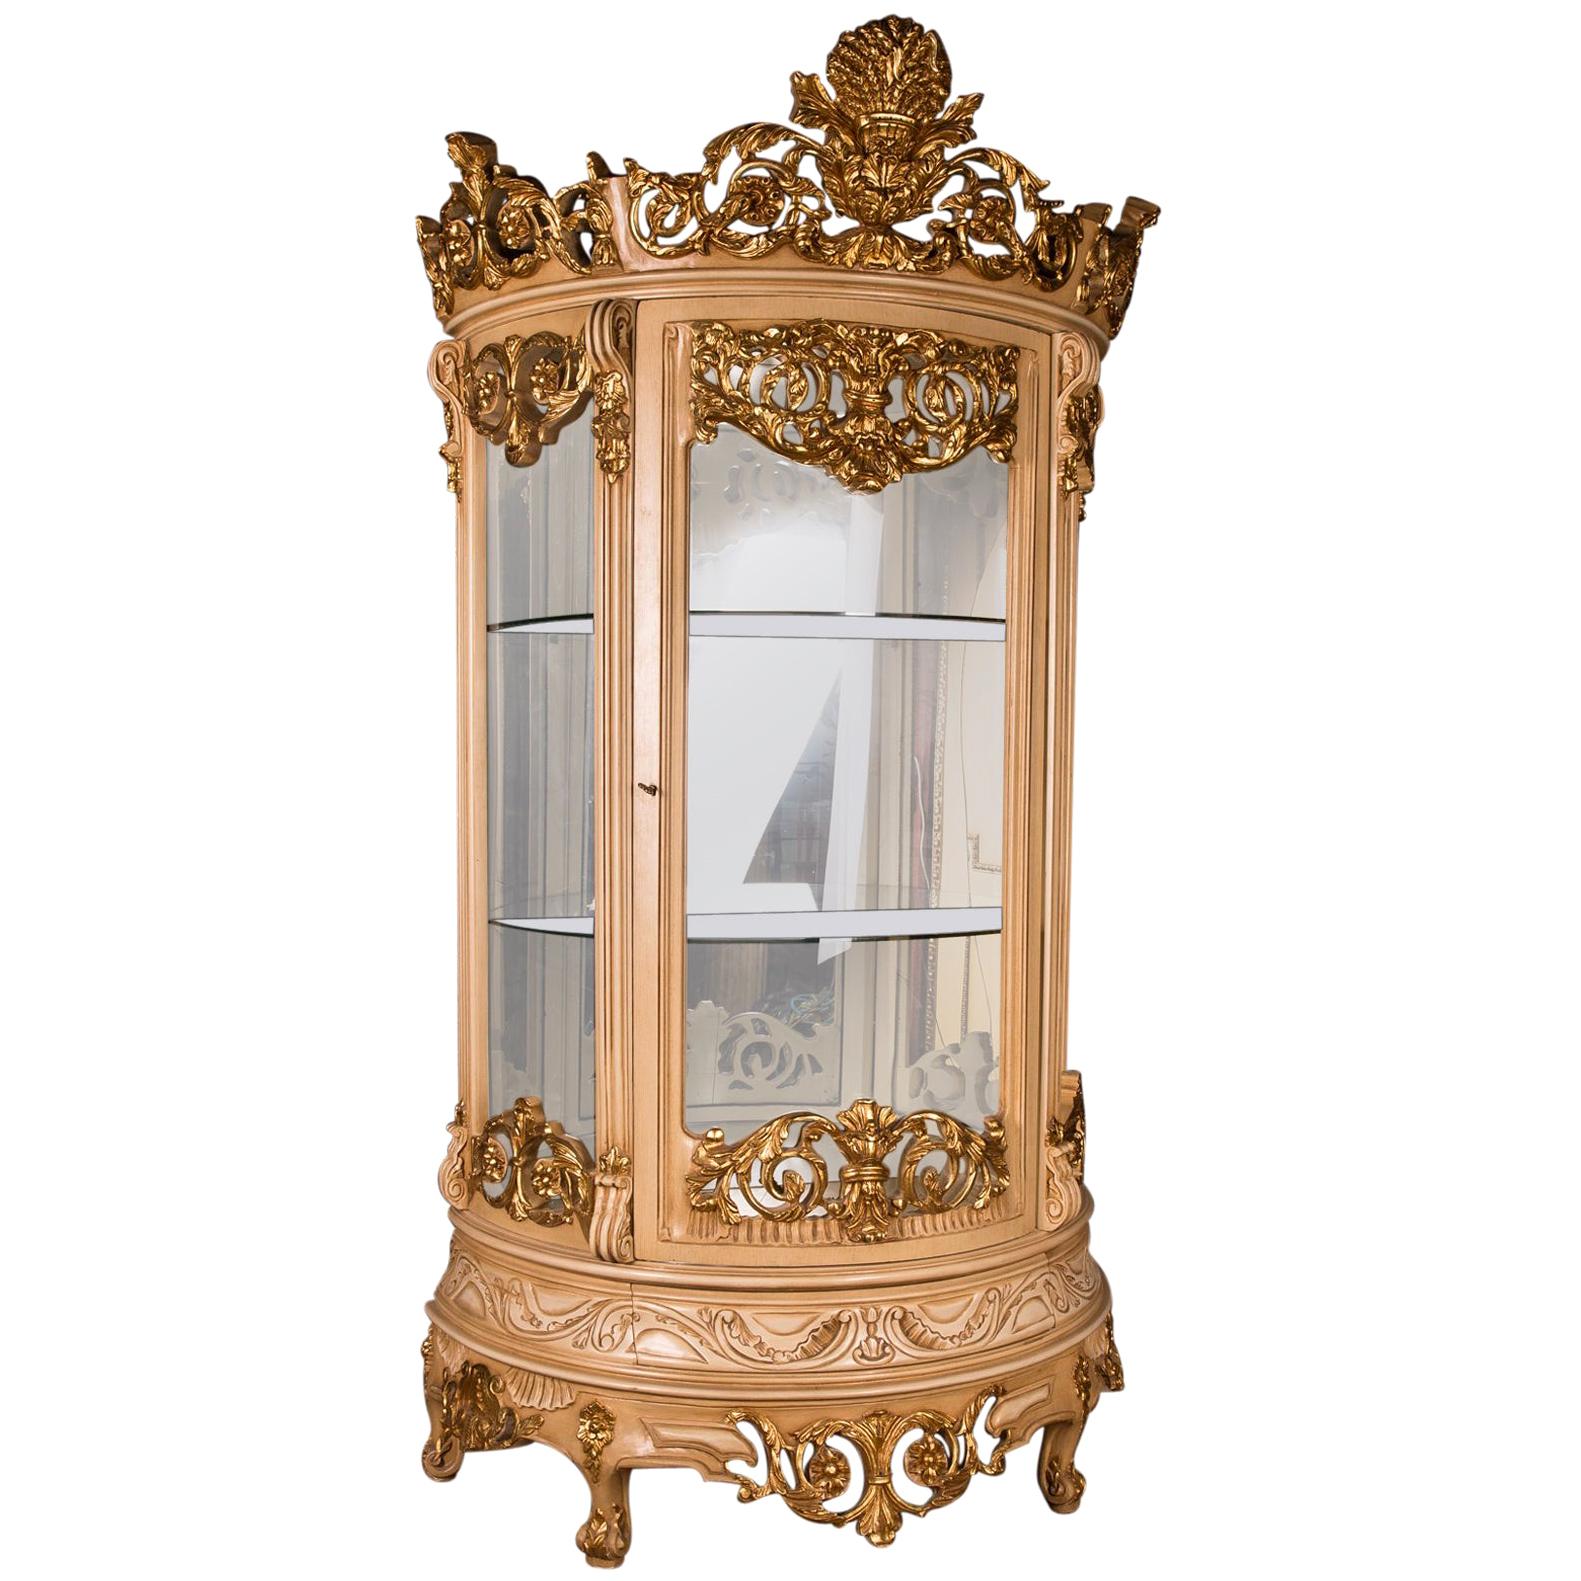 Monumental French Vitrine in the Style of the 18th Century